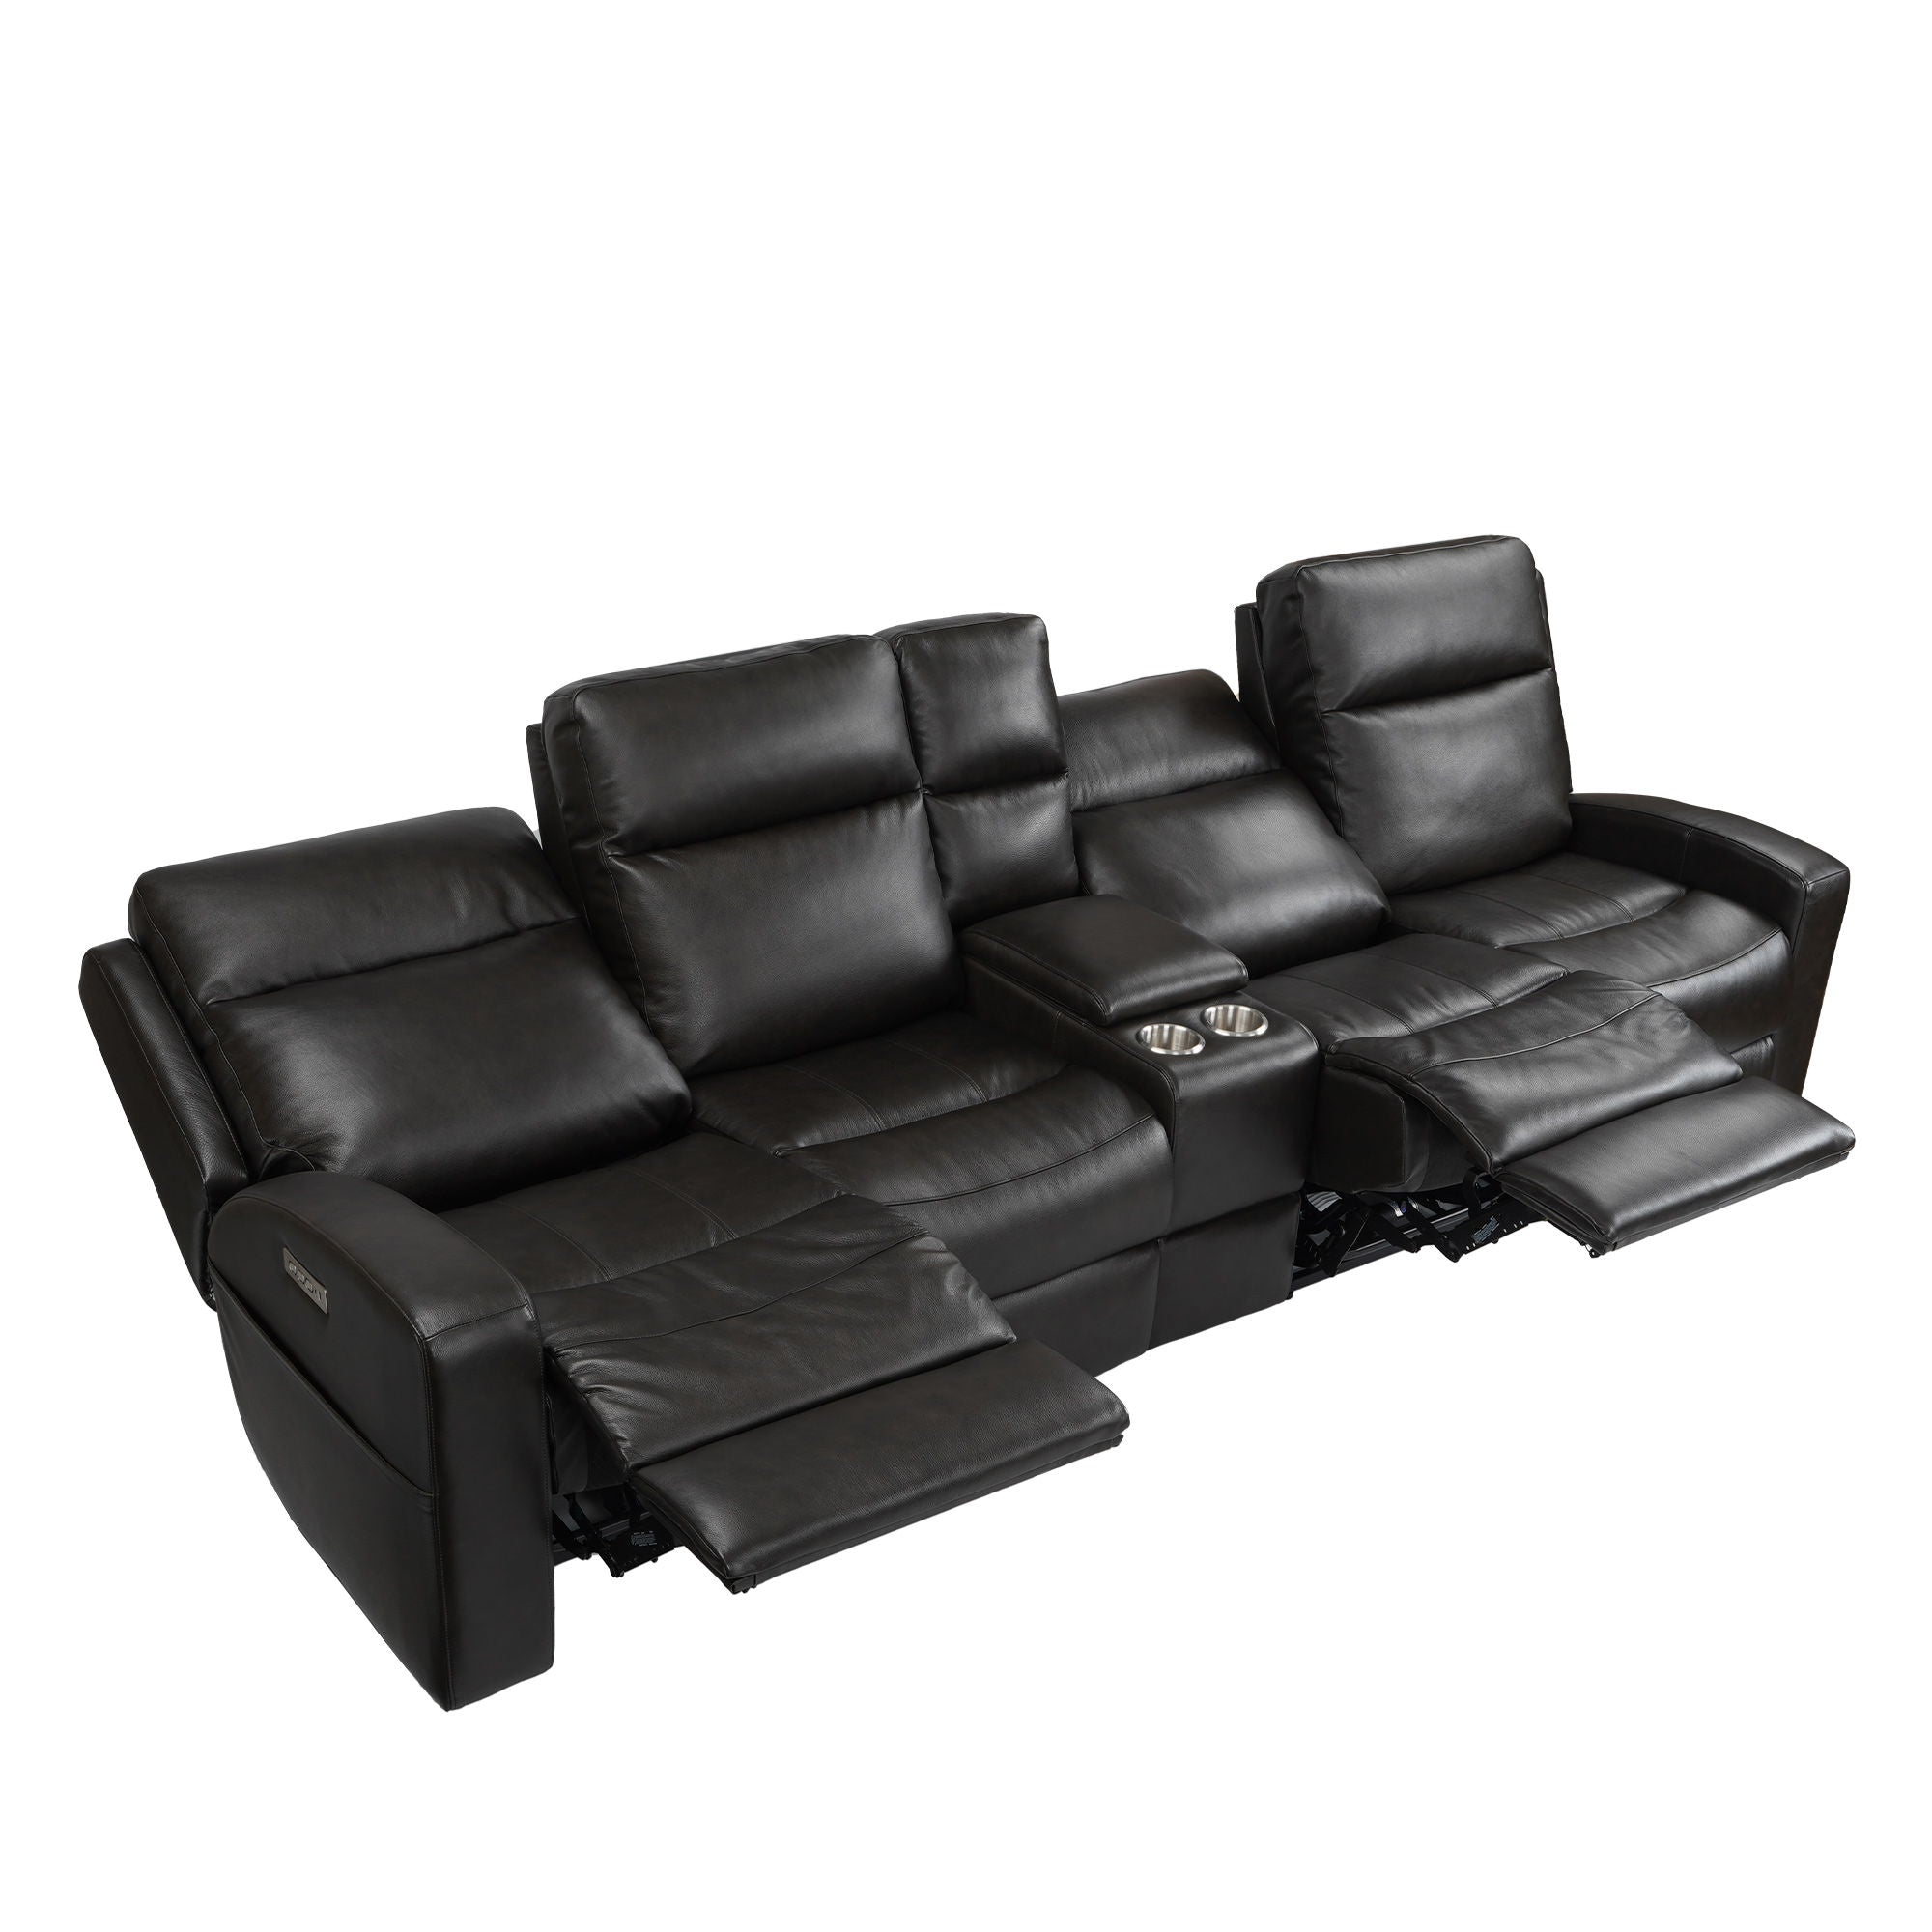 Caleb Triple Power 4 Seats Sofa With Console, Top Grain Leather, Lumbar Support, Adjustable Headrest, Storage Side Pocket, USB & Type C Charger Port, All Seats With Power